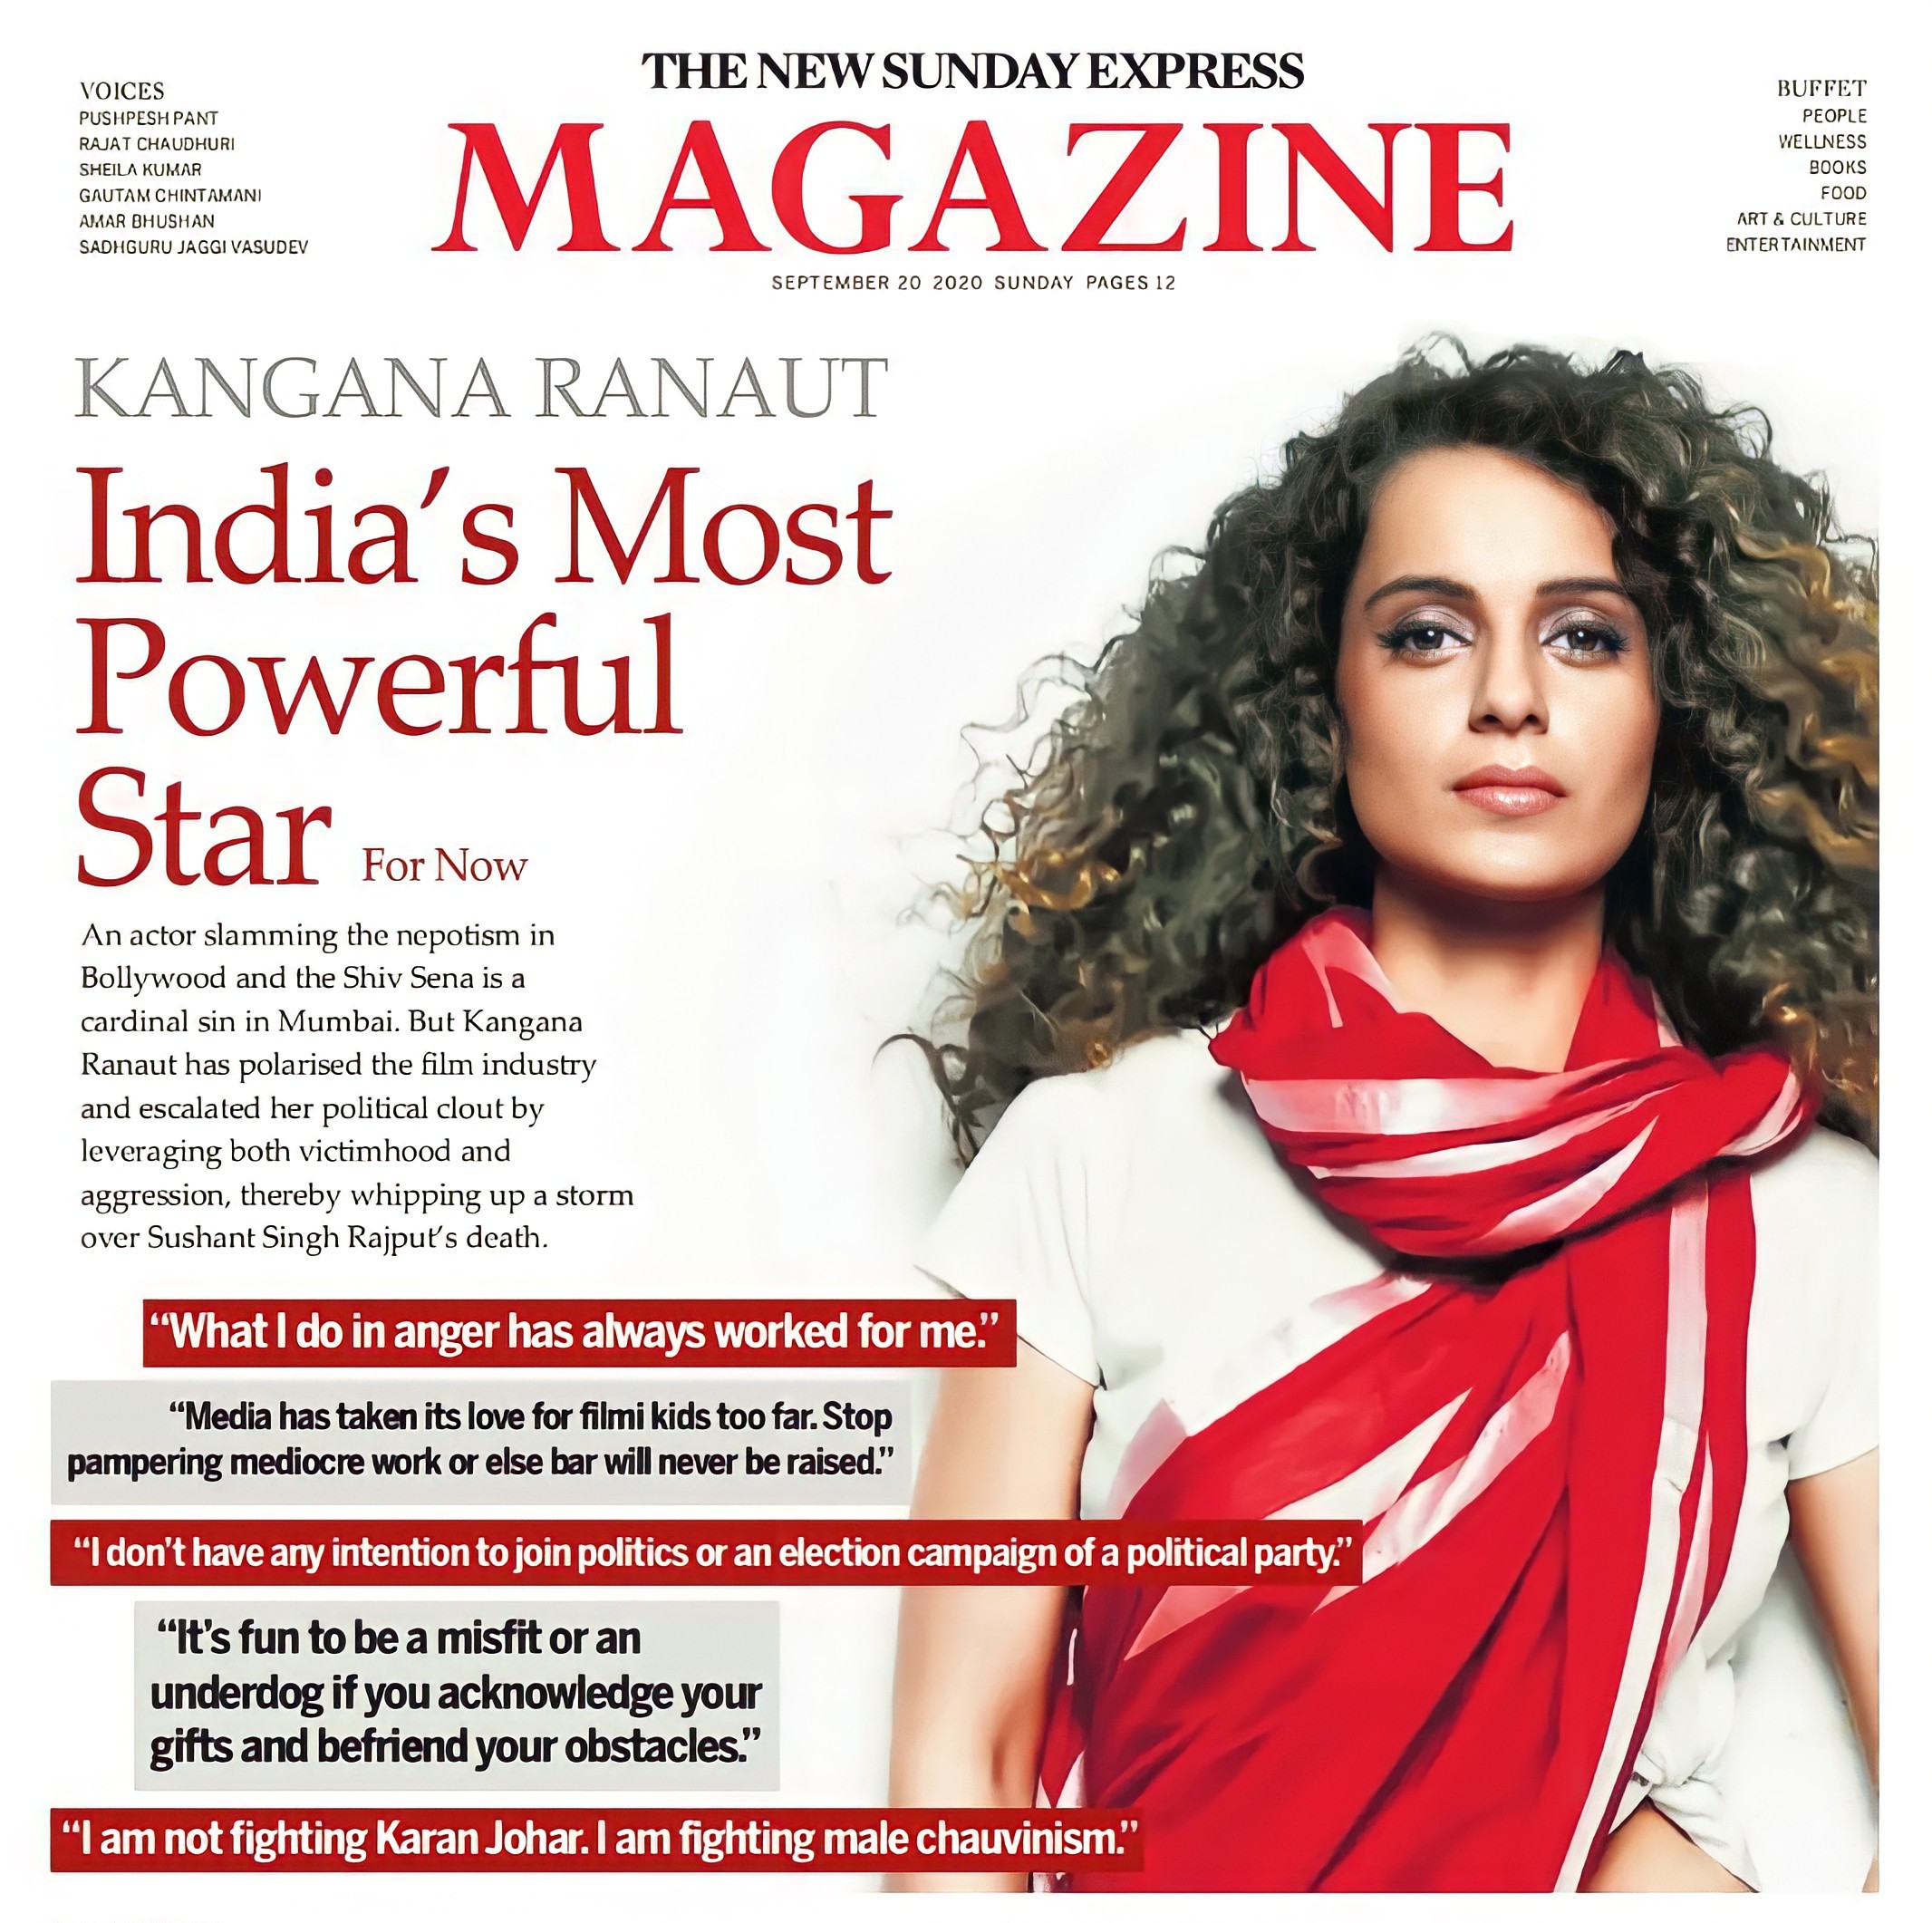 KANGANA RANAUT ON THE COVER OF THE INDIAN EXPRESS